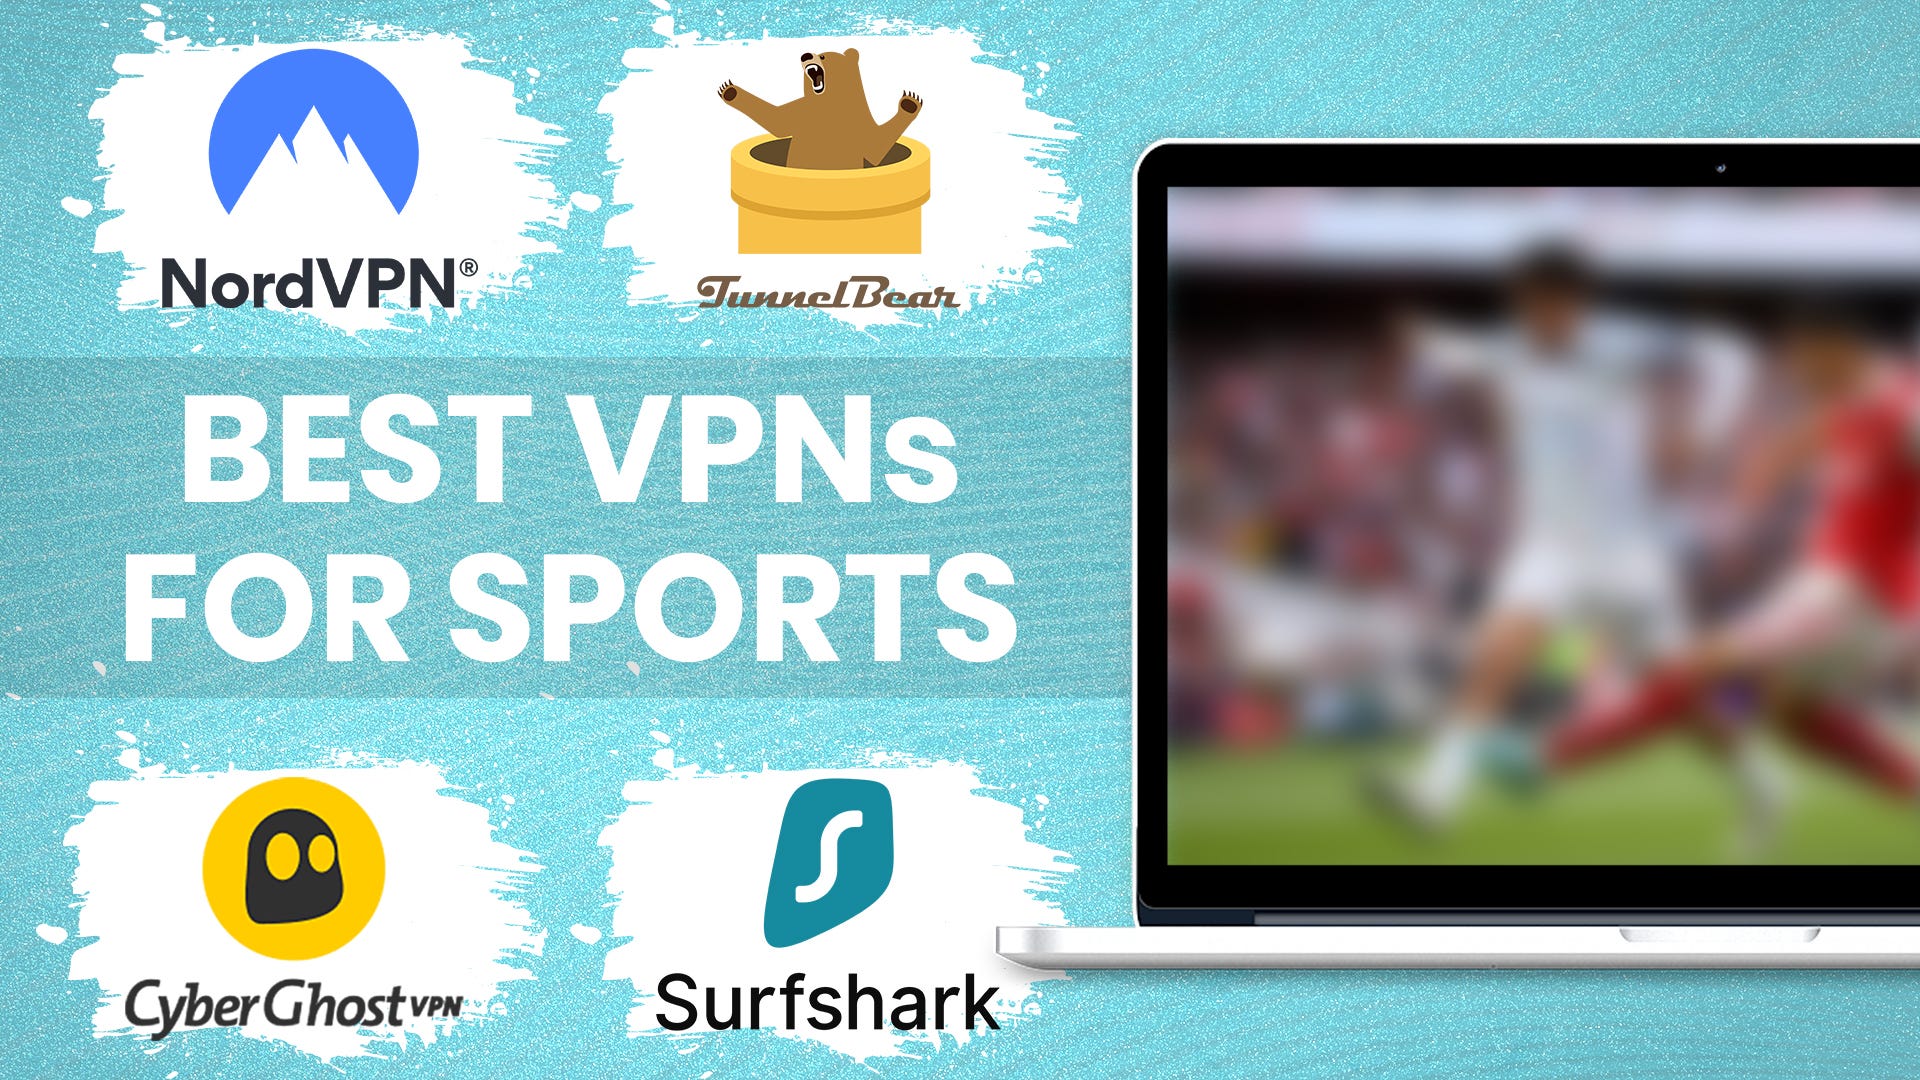 What is the best VPN for watching sports?